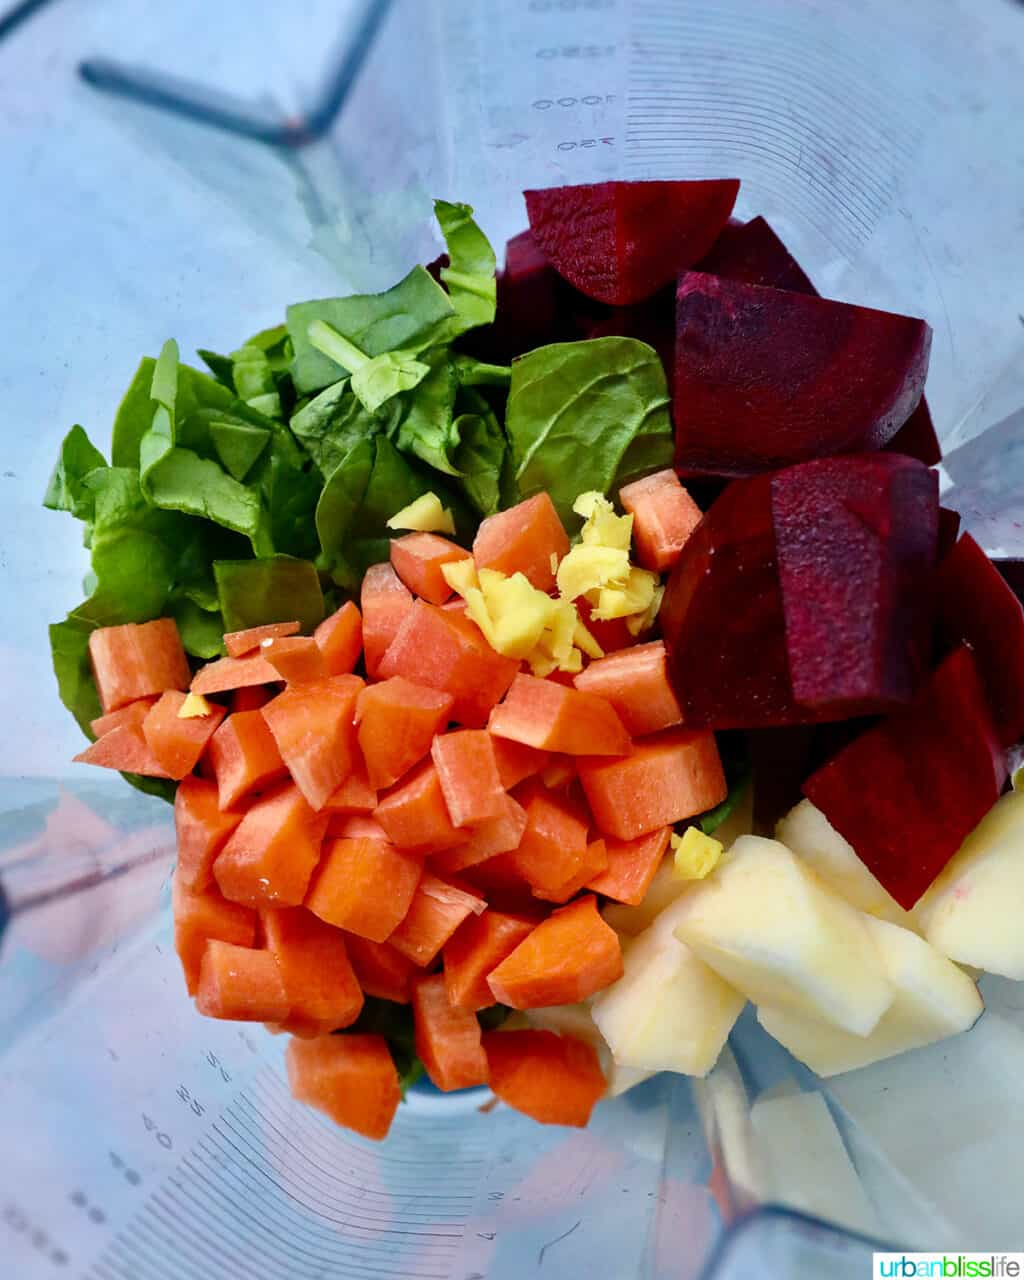 beets, carrots, spinach, apples, ginger in a blender.